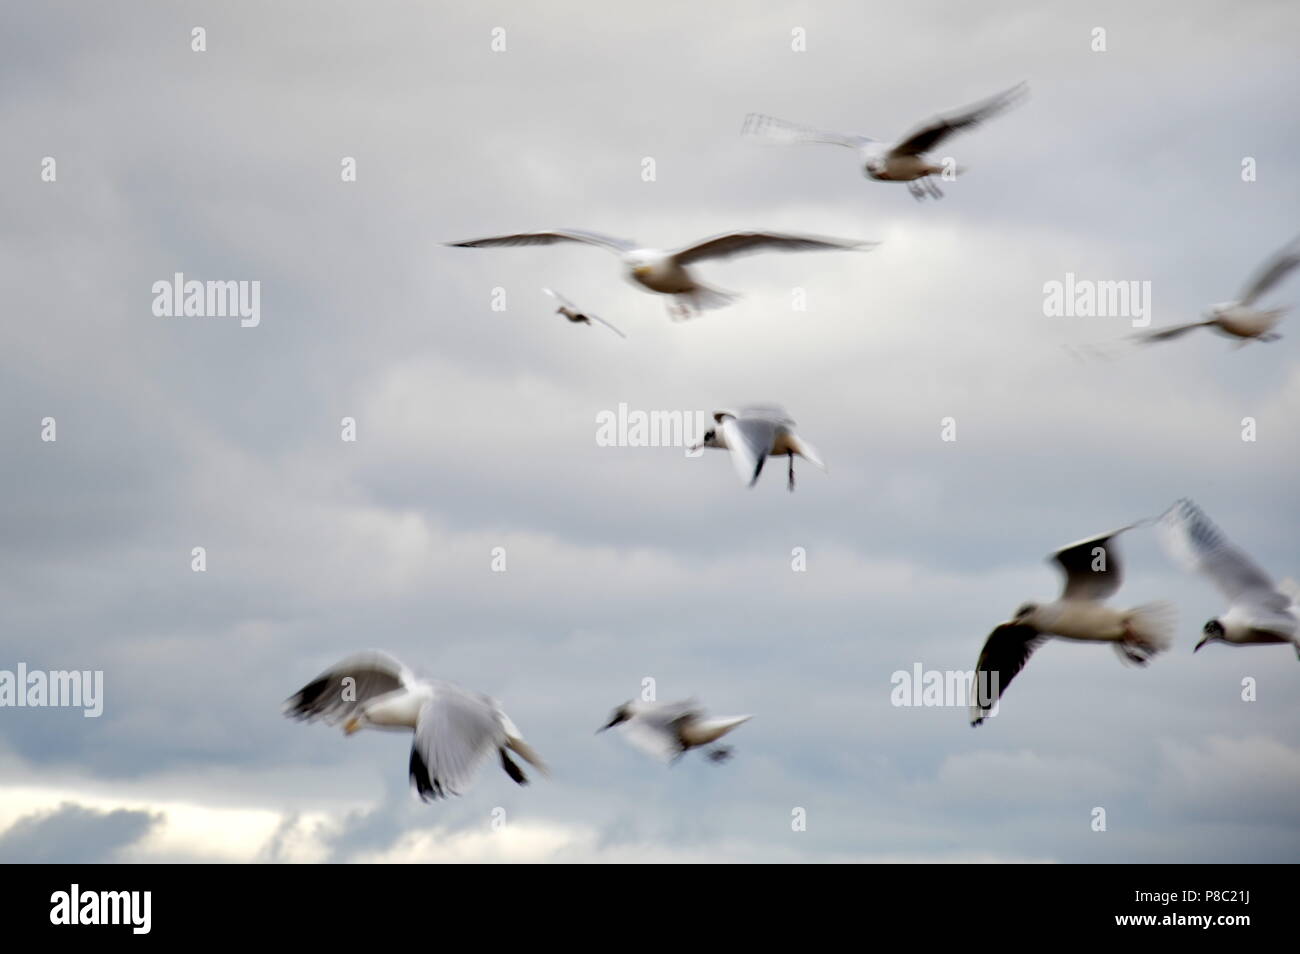 seagulls flying on a cloudy sky Stock Photo